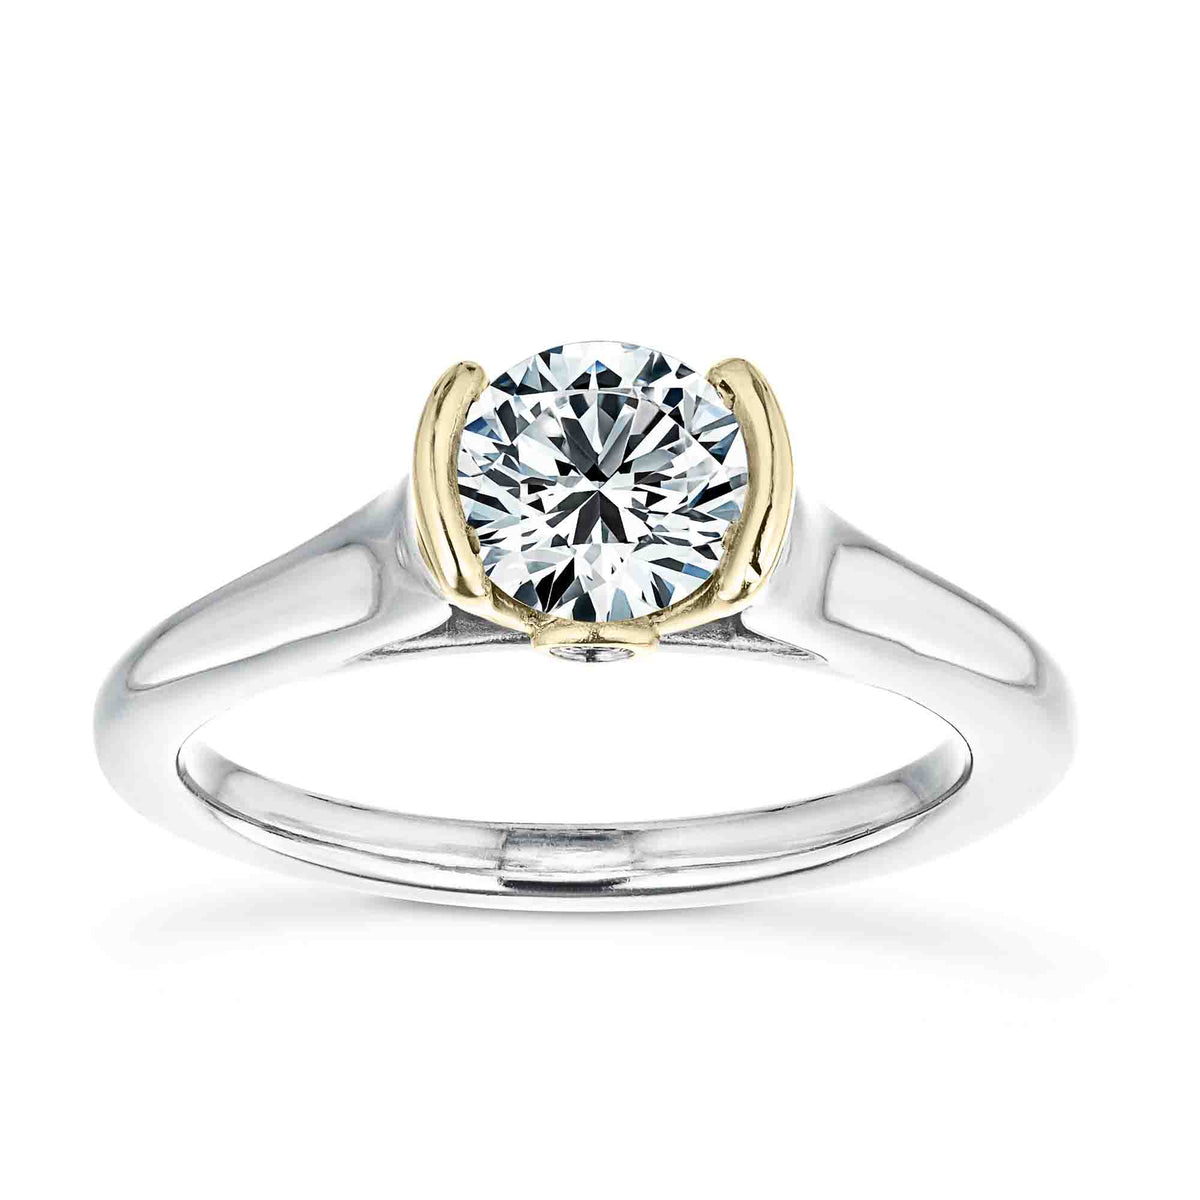 Shown with 1ct Round Cut Lab Grown Diamond in 14k White Gold and 14K Yellow Gold